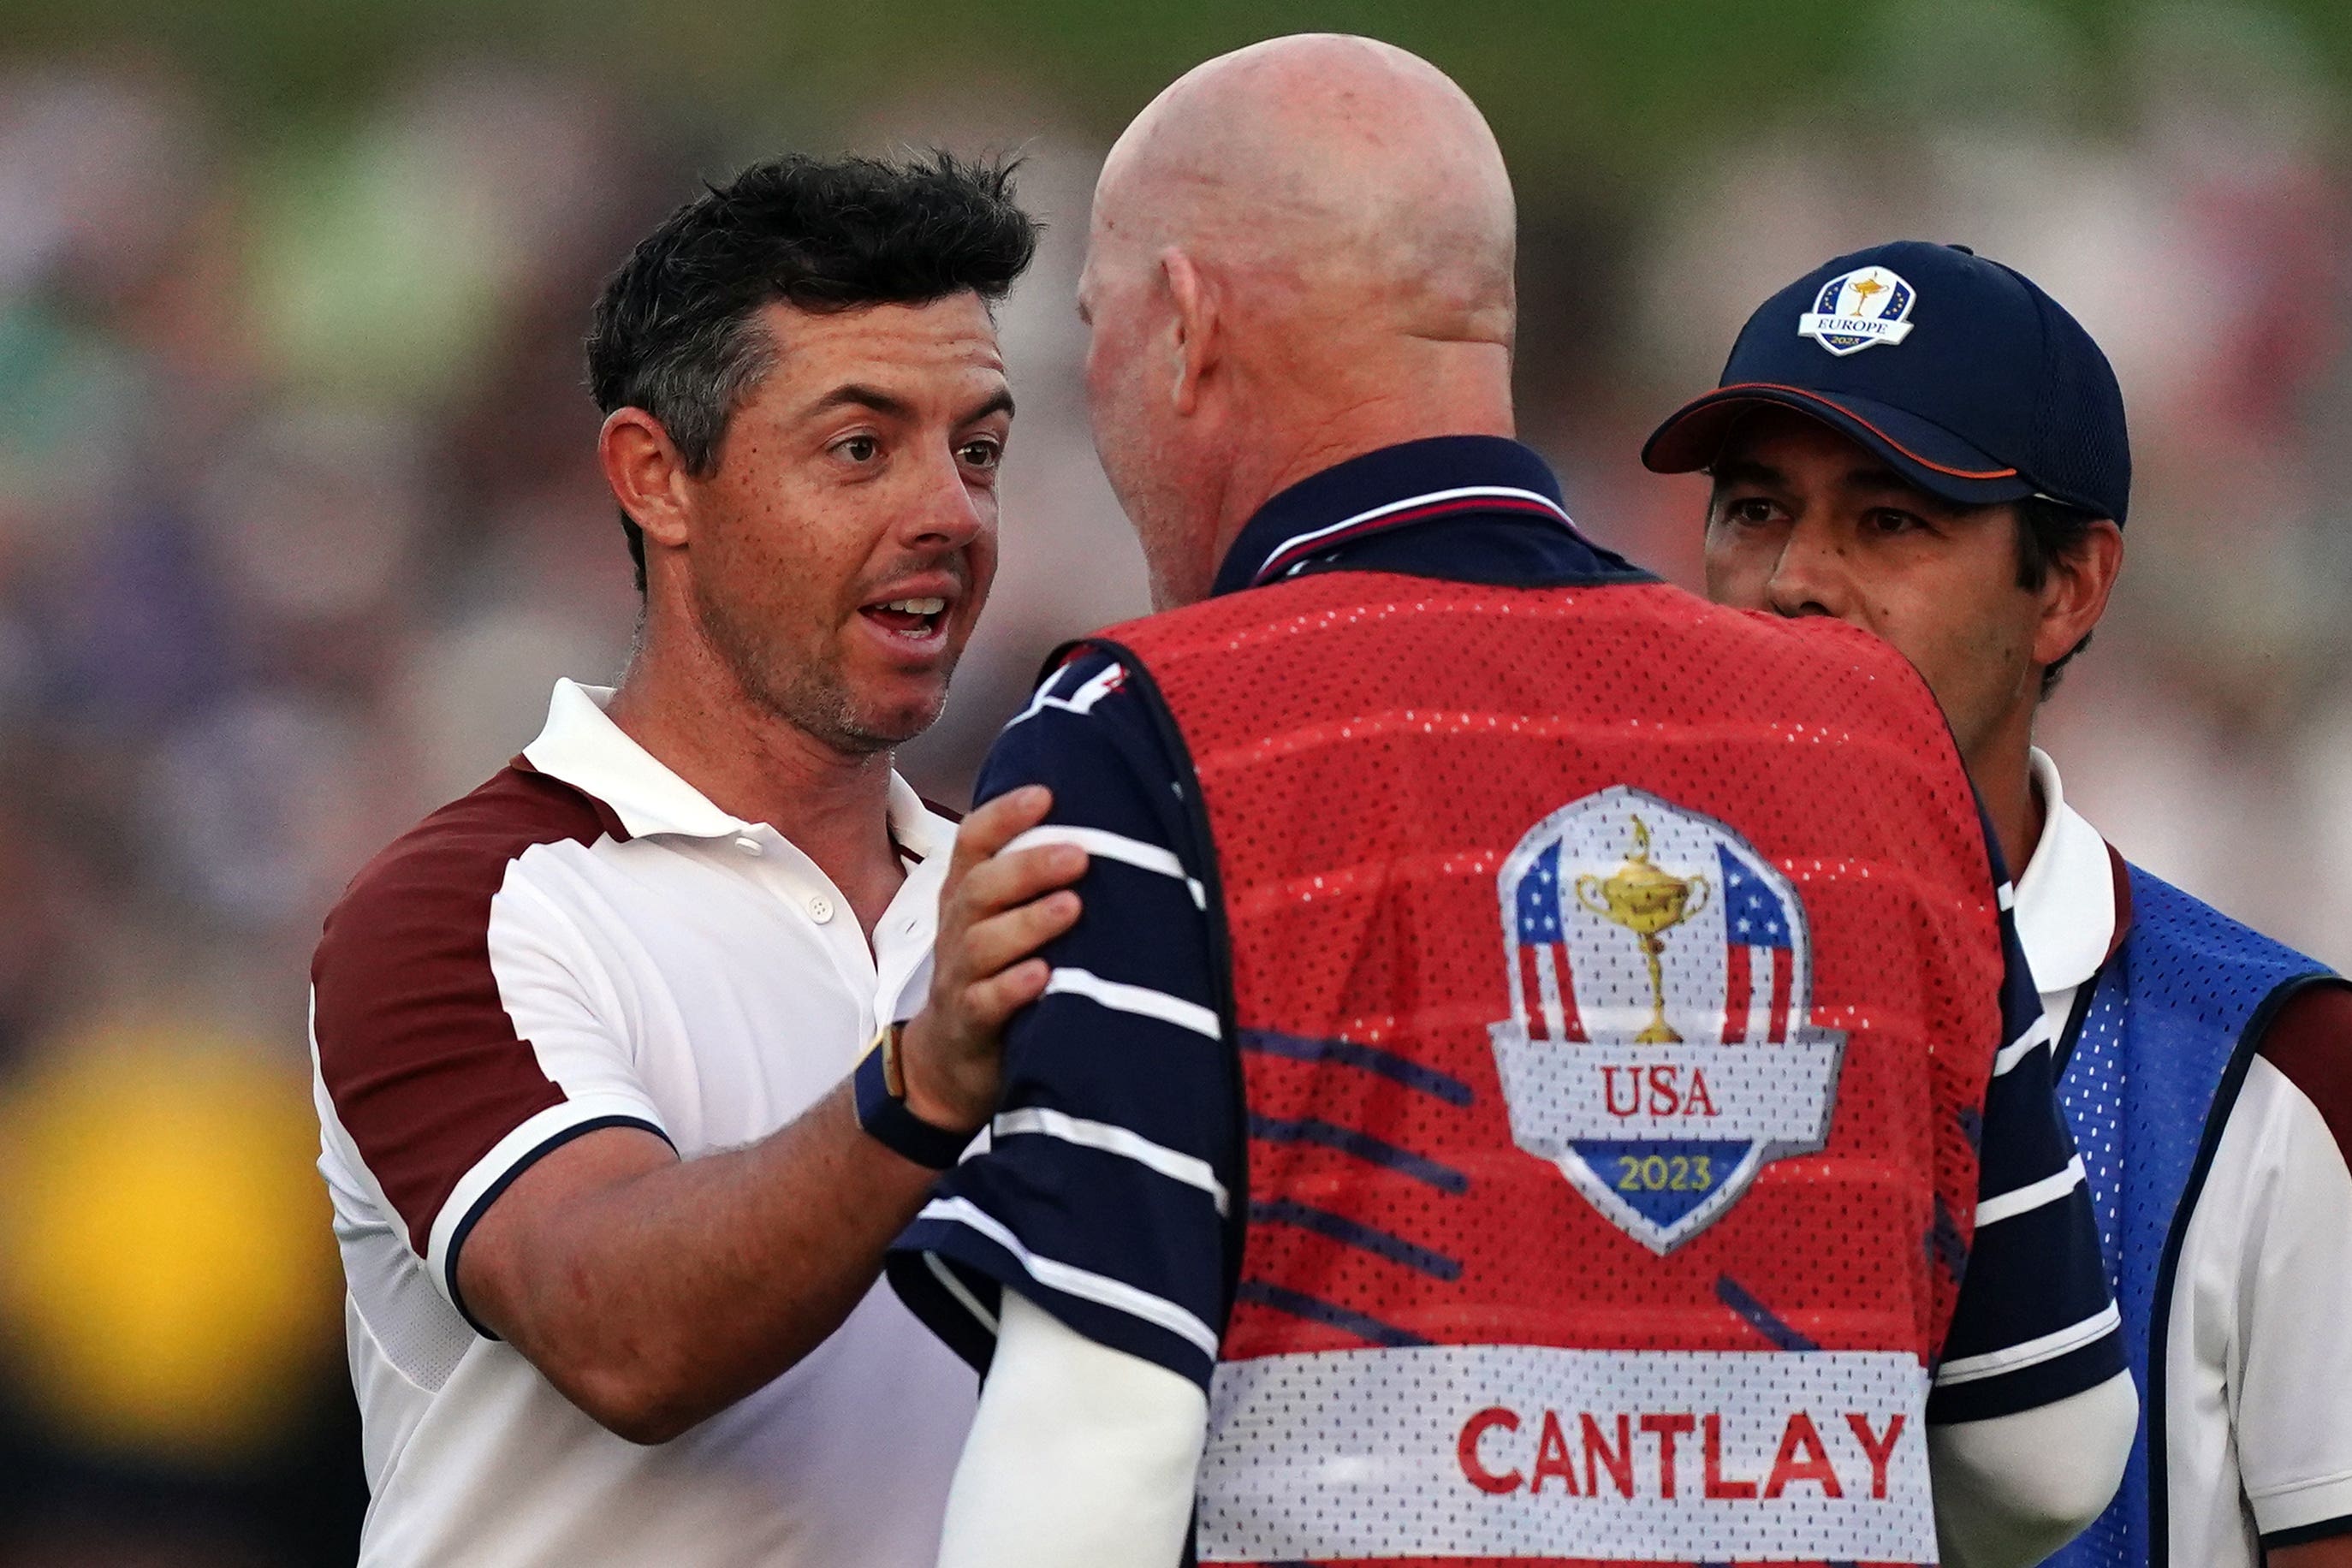 Europe four points from victory as Rory McIlroy involved in Ryder Cup